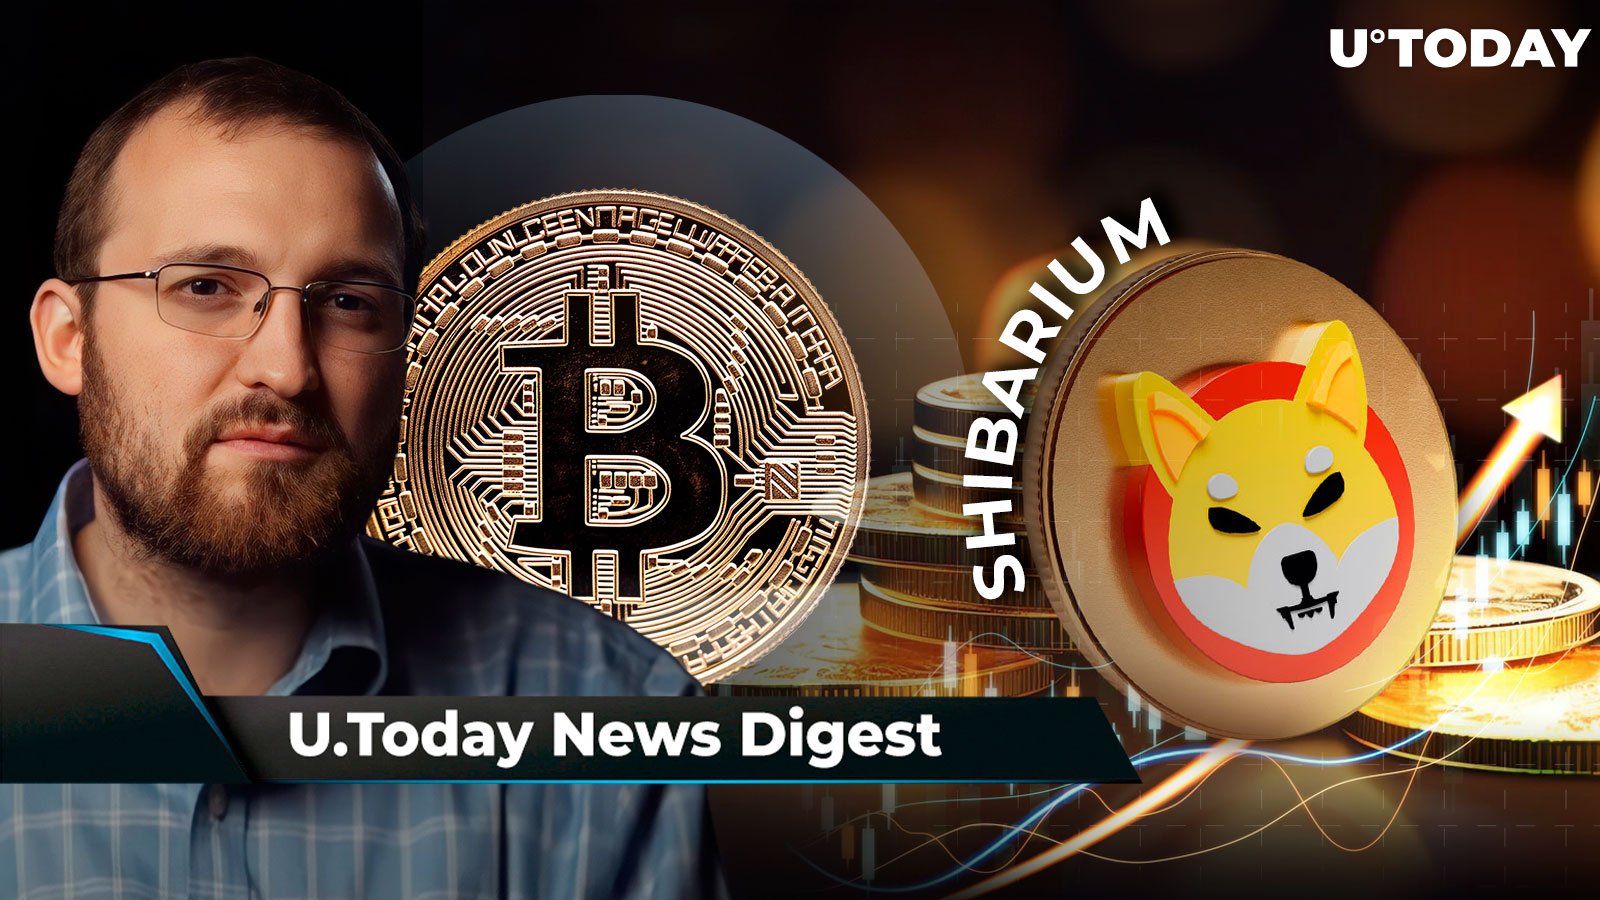 Cardano Founder Makes Unexpected Bitcoin Statement, Shibarium Secures New Milestone, XRP Surges 4,586% in Liquidations: Crypto News Digest by U.Today